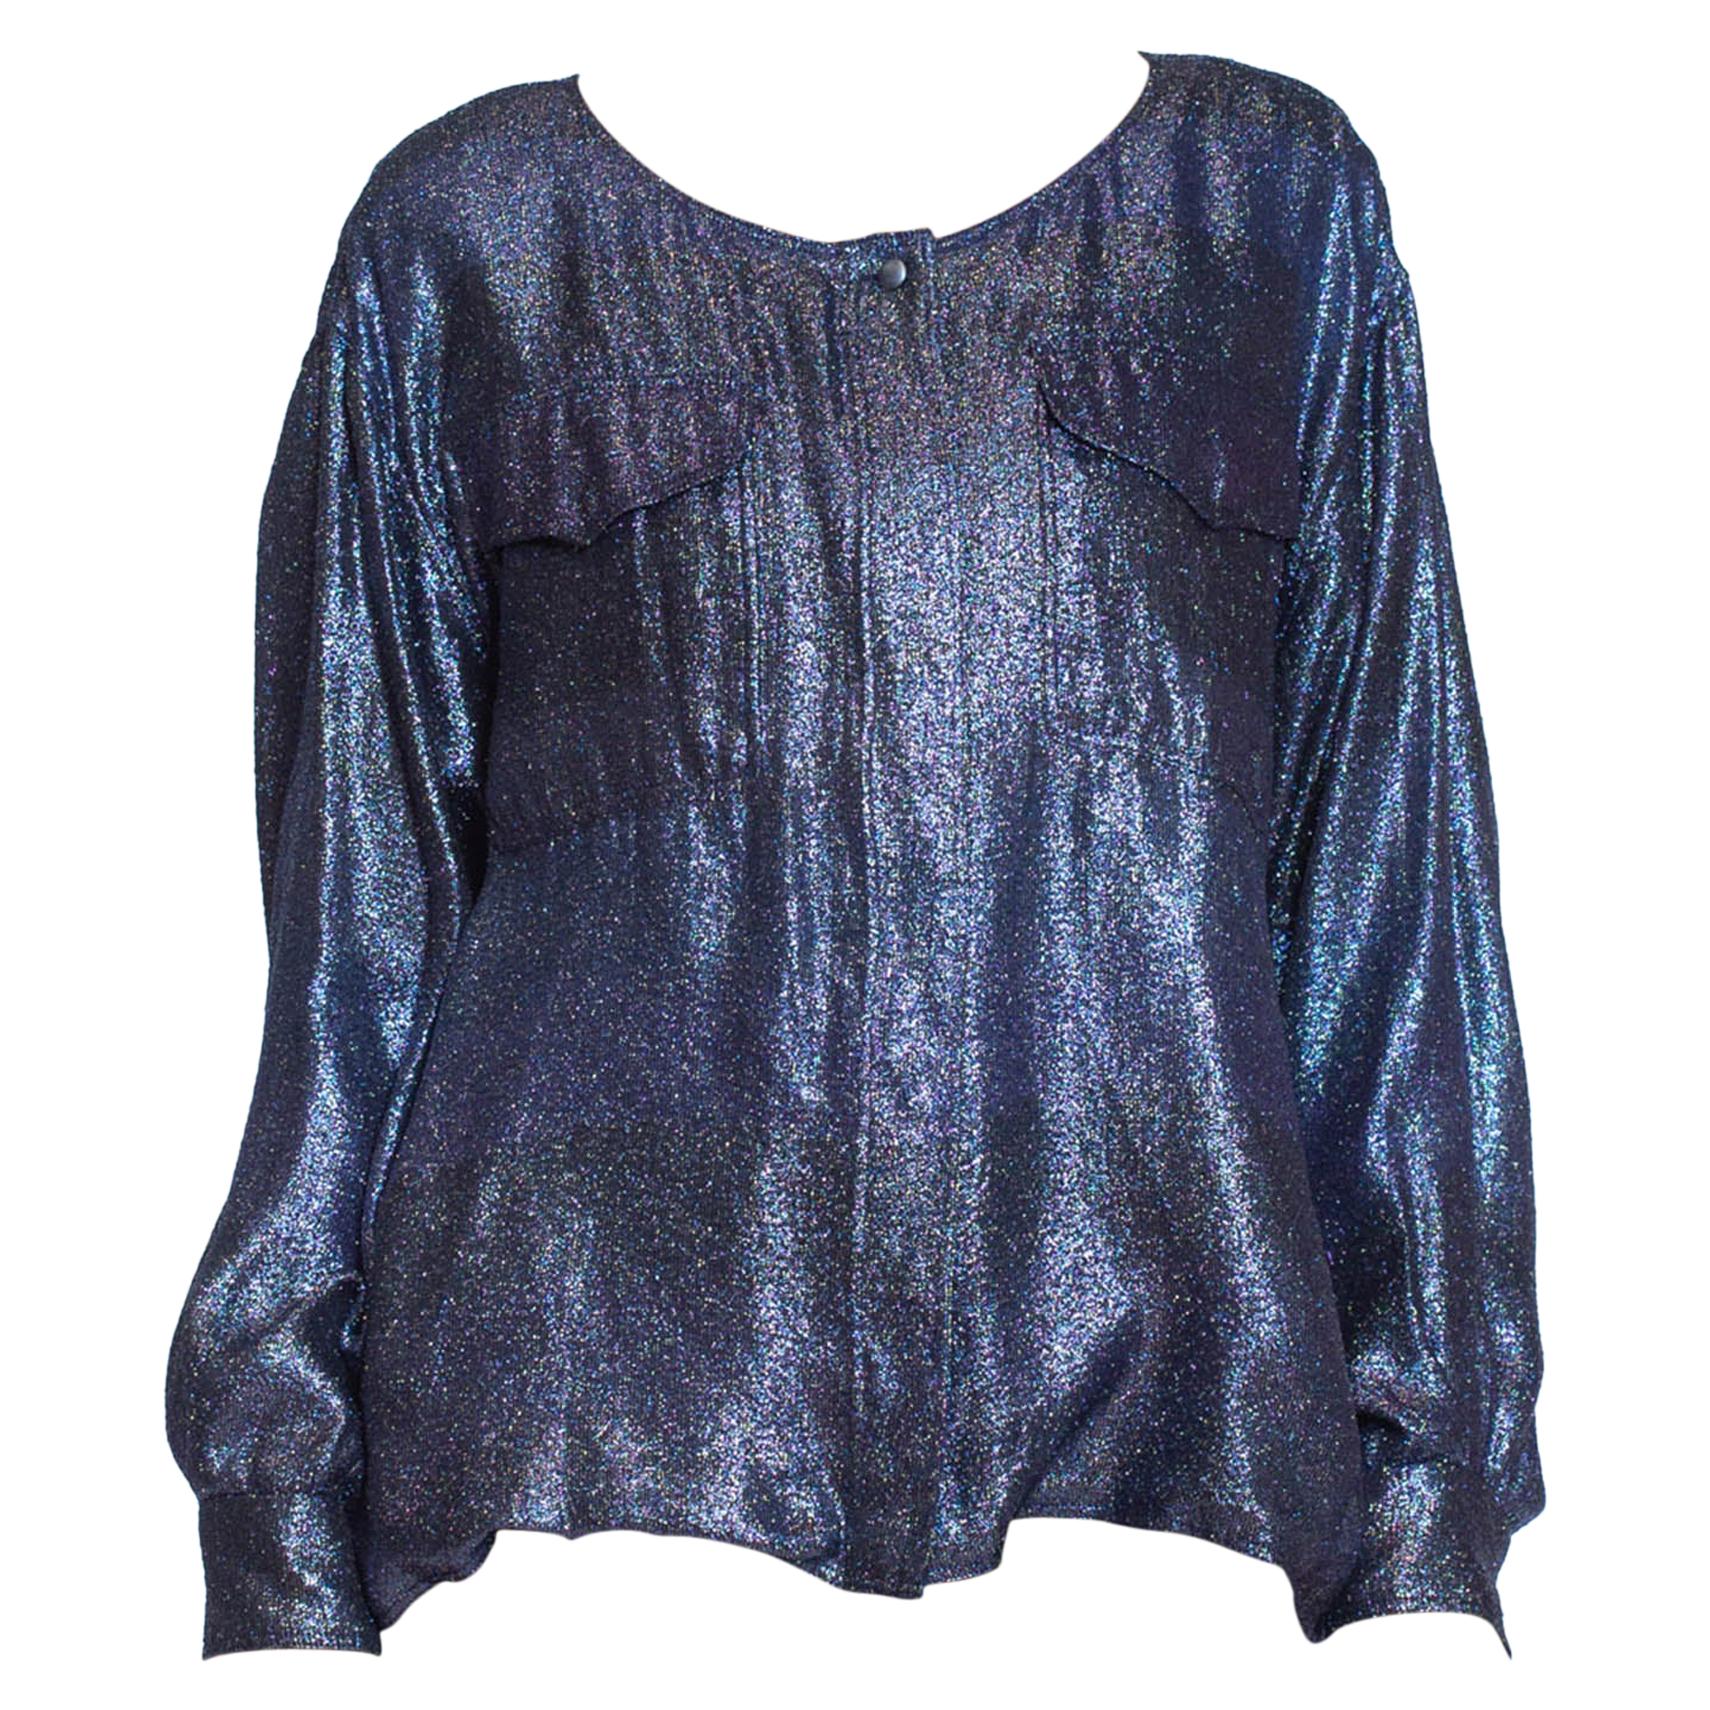 1980S PER SPOOK COUTURE Teal Metallic Silk Lurex Chiffon Military Styled Blouse